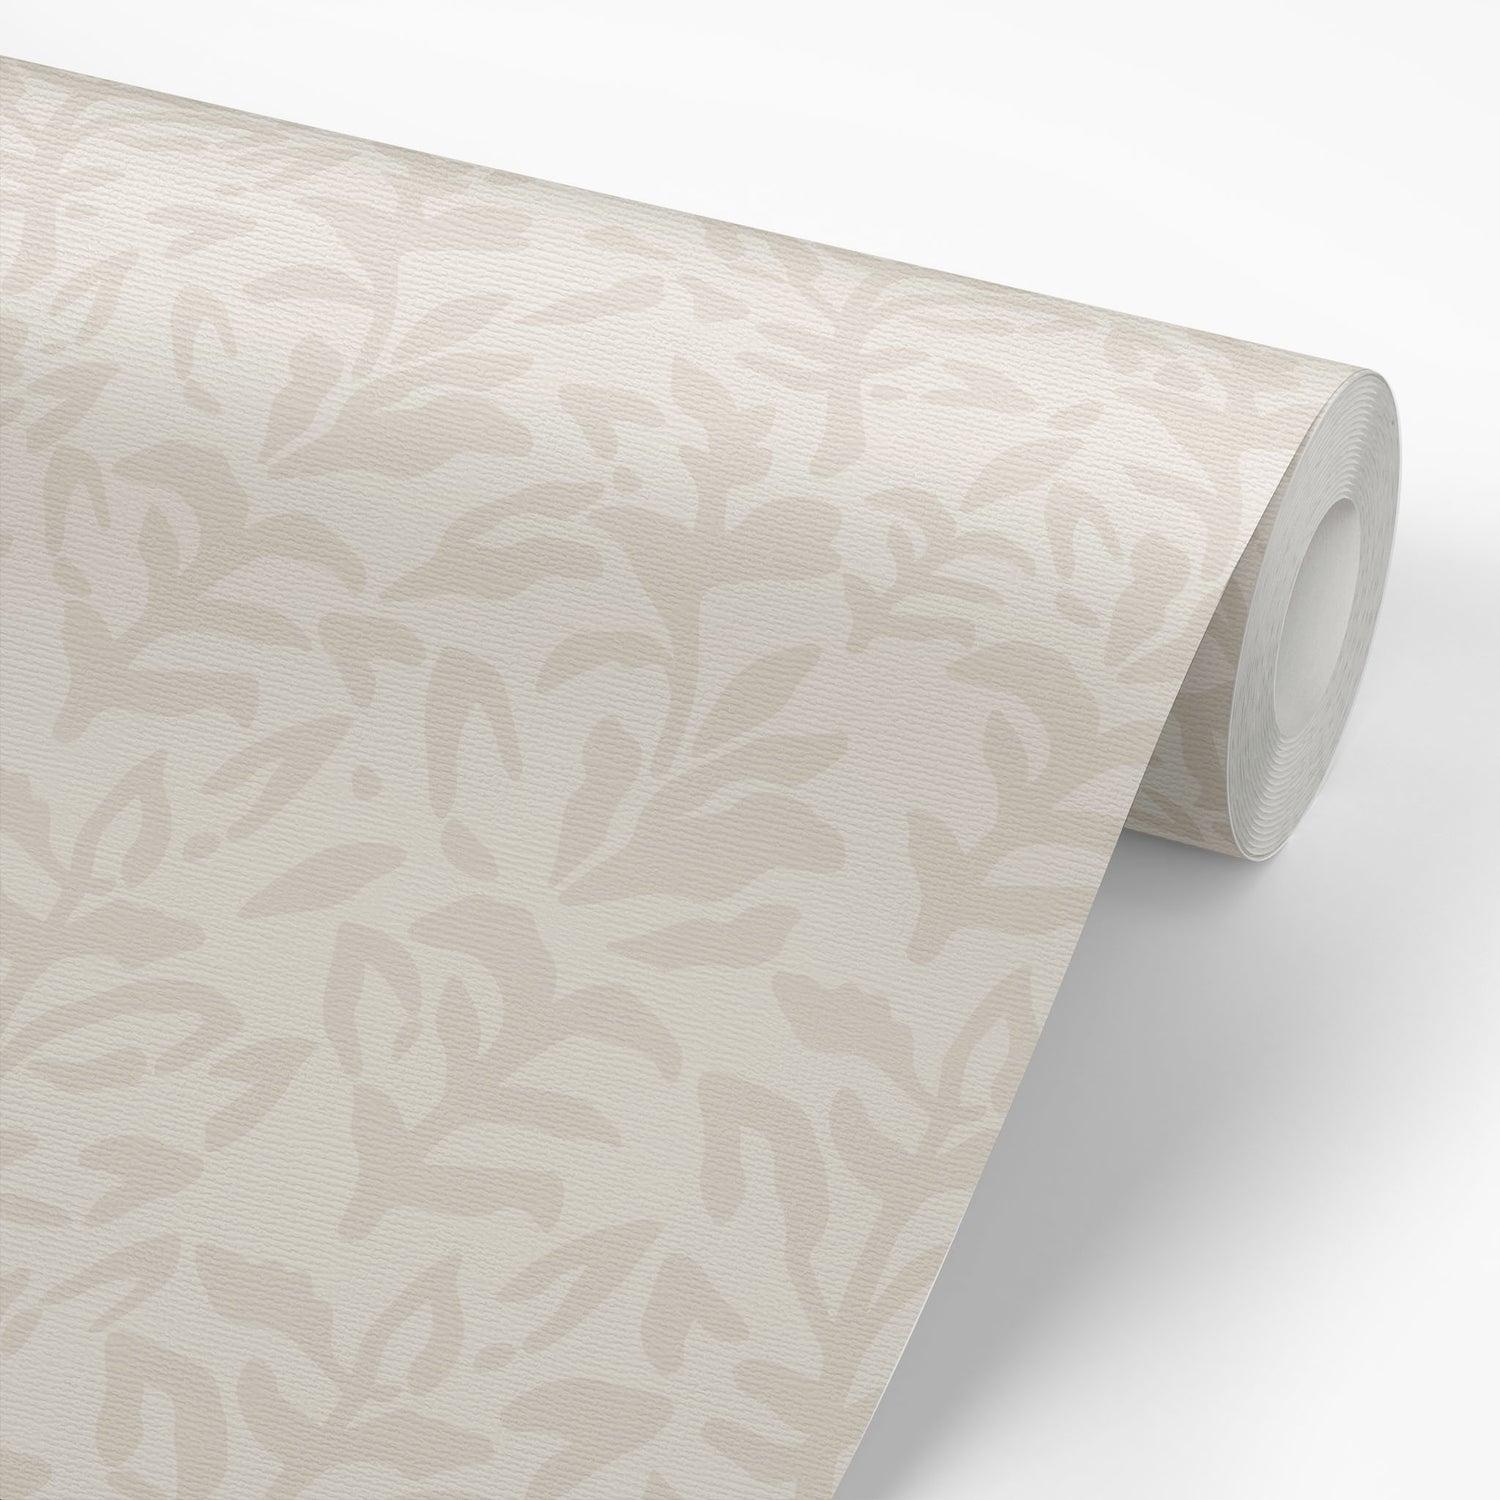 Transform your walls with the elegant and timeless Belmont Wallpaper shown on a wallpaper roll.